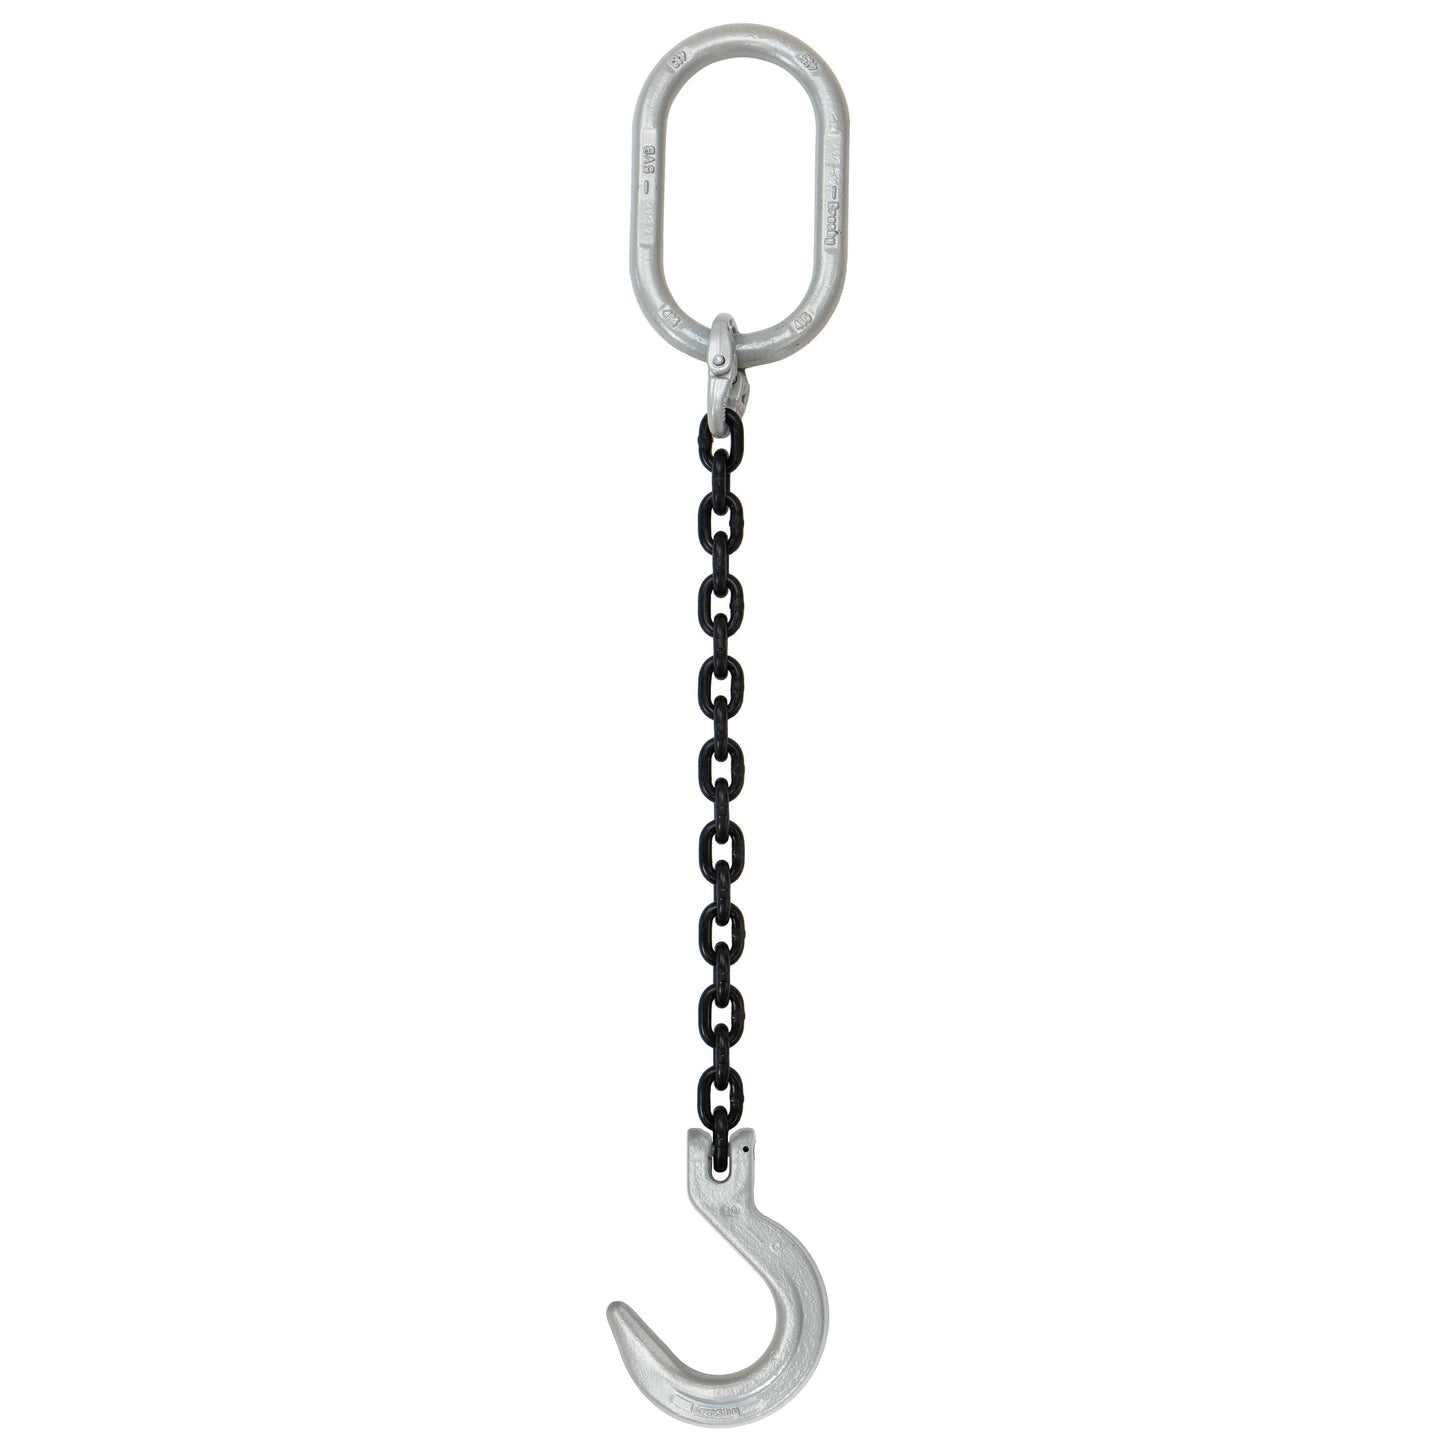 12 inch x 10 foot Domestic Single Leg Chain Sling w Crosby Foundry Hook Grade 100 image 1 of 2